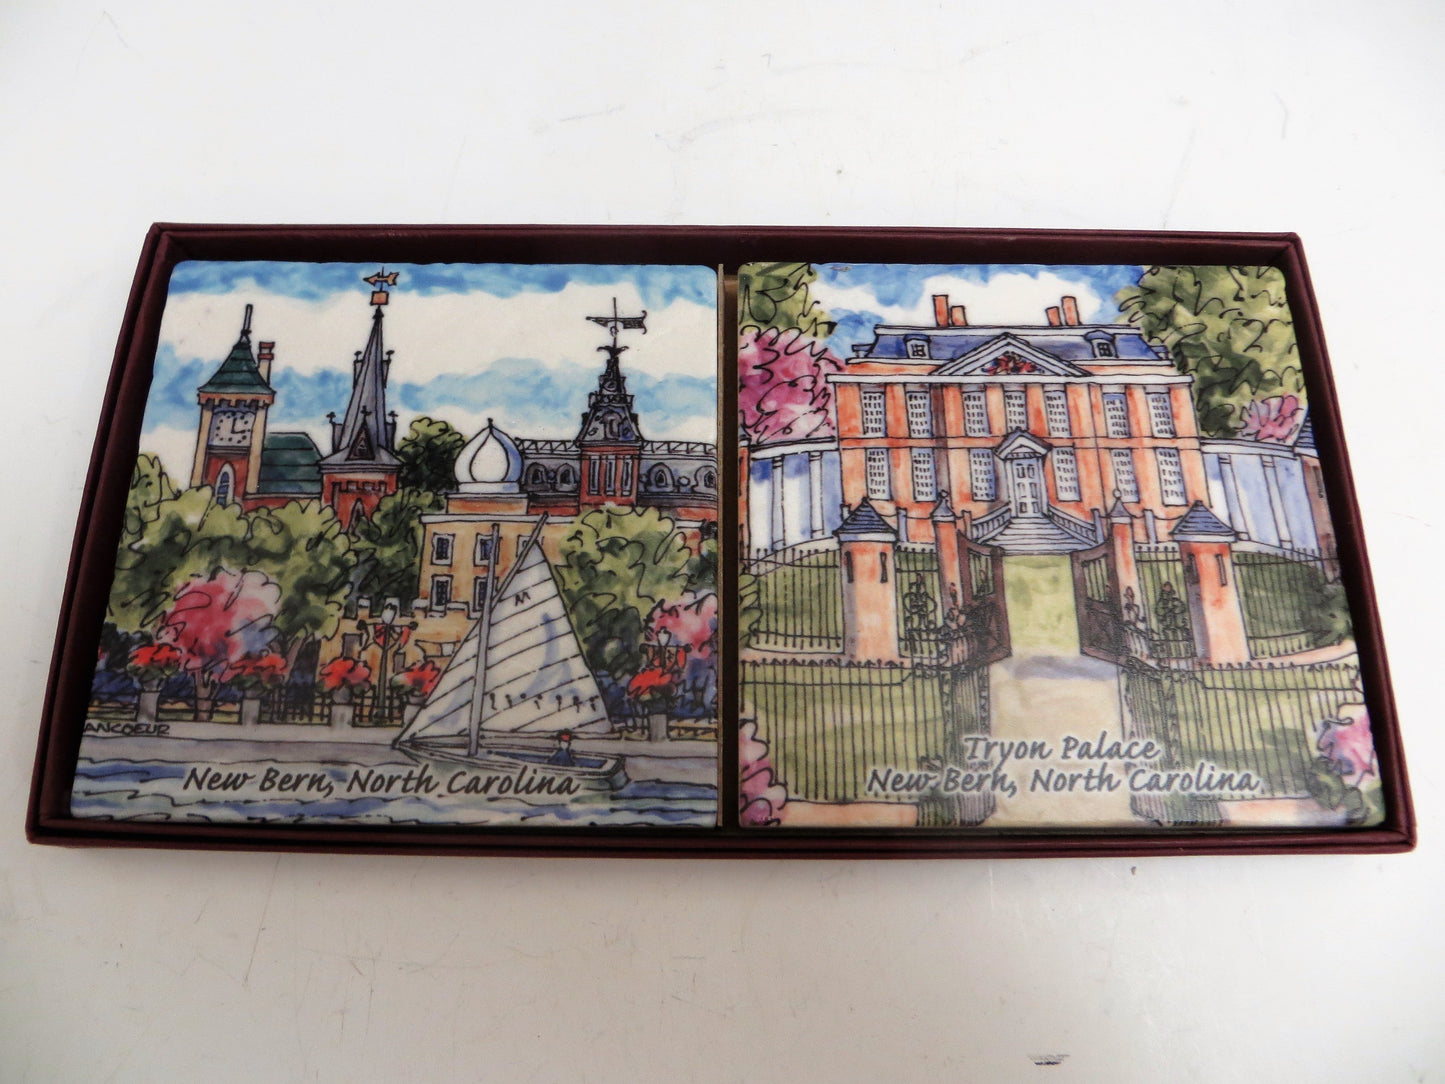 Screen New Bern Coaster Set of 2🎨 Gifts🎨 Buy Art at Carolina Creations Gallery in Downtown New Bern🎨